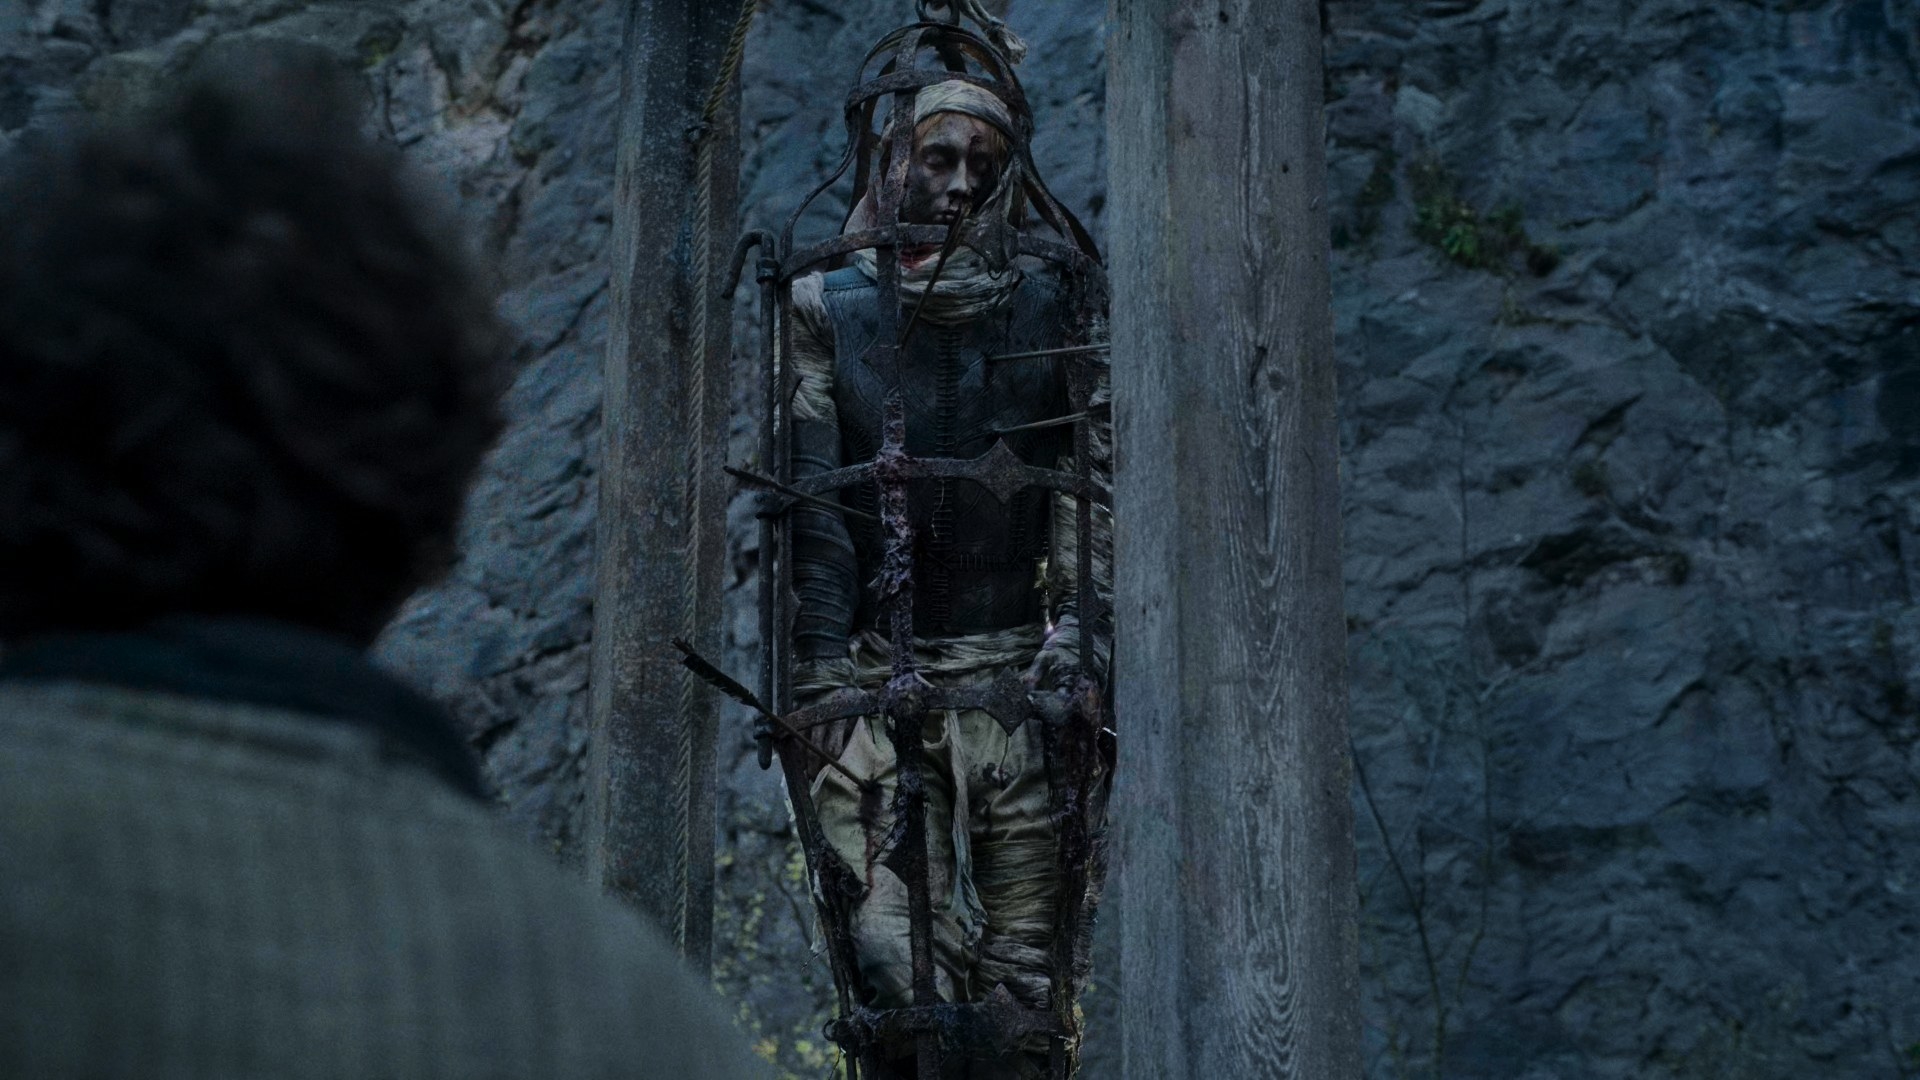 A man in beige clothing and a headscarf is in a cage hanging from a gibbet. He is pierced with many arrows through his torso, which has a stylised leather jerkin on it. He has been dead for a while